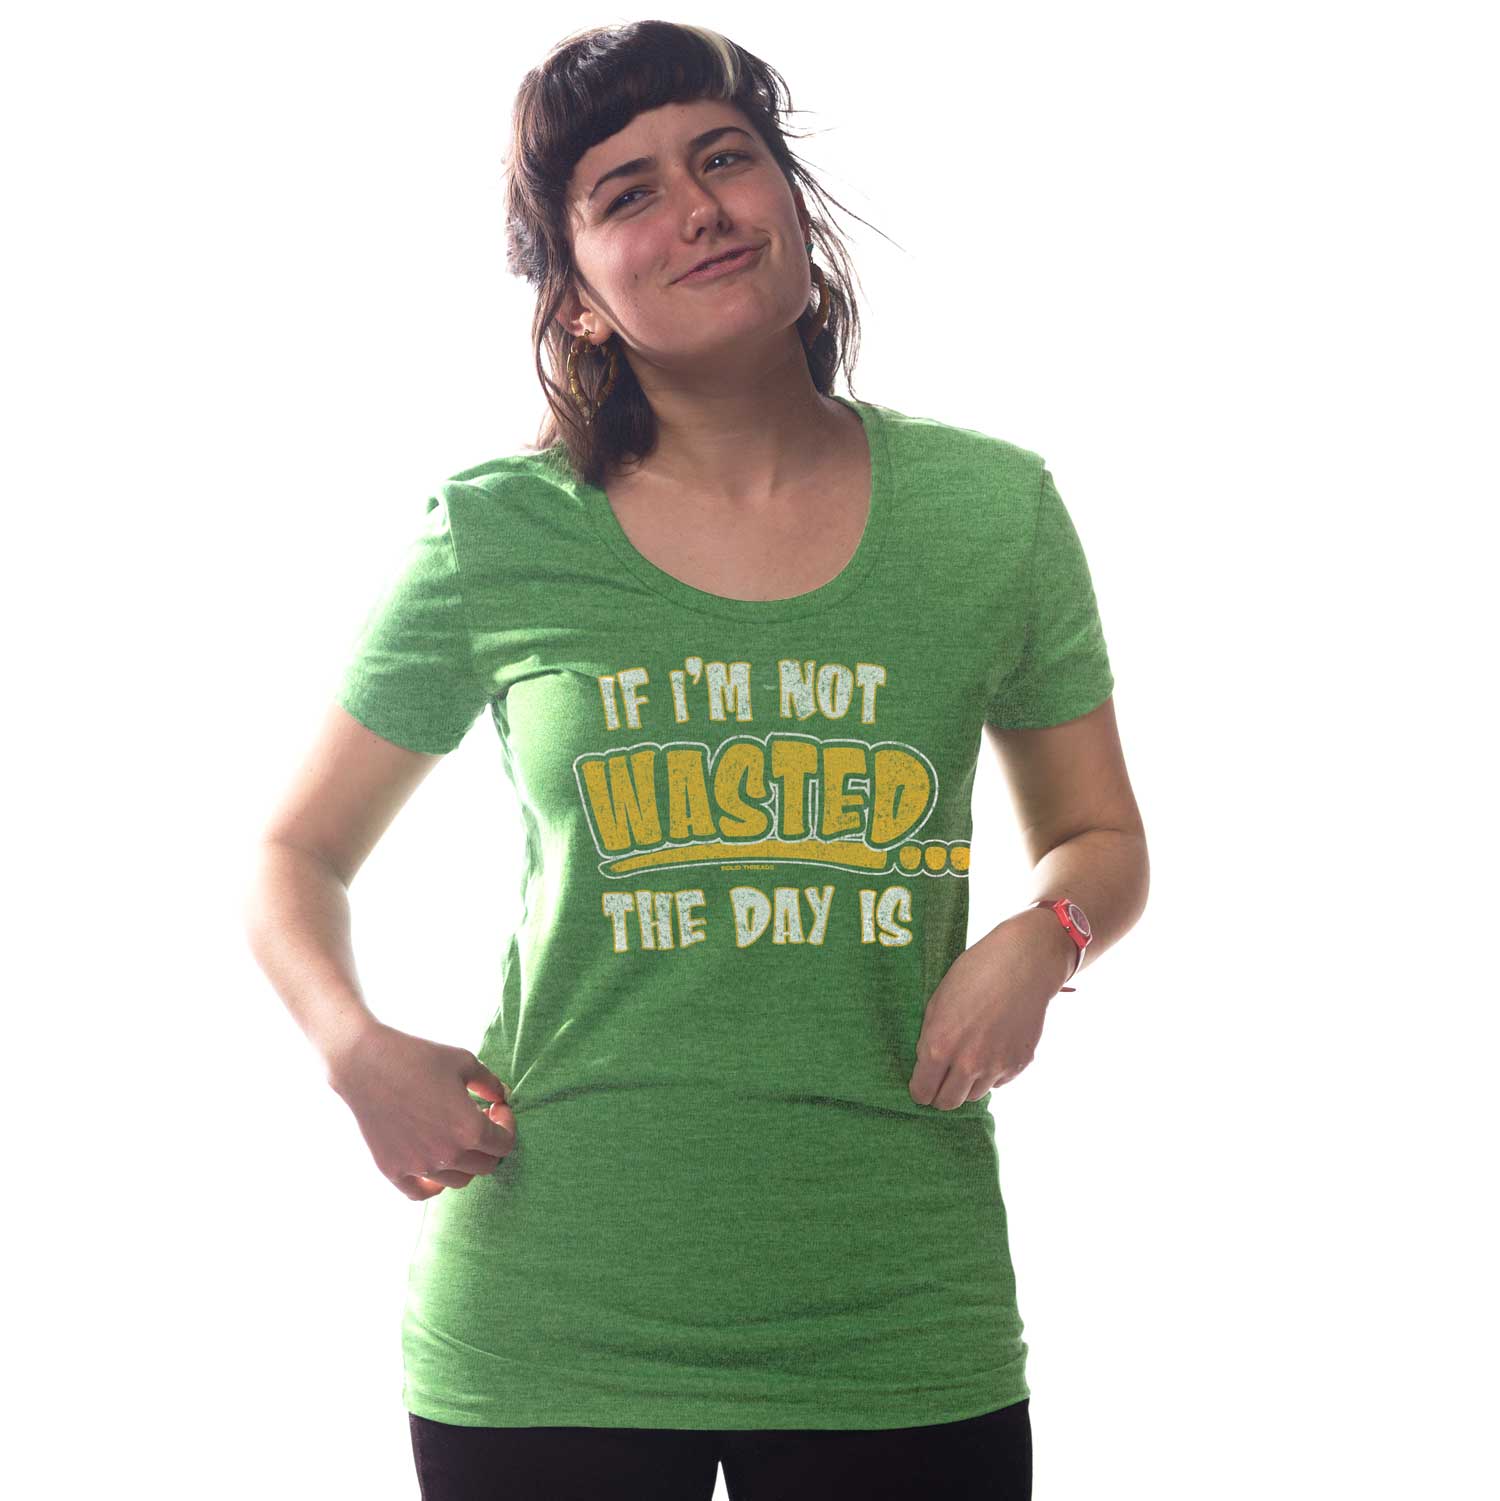 Women's Wasted Day Funny Partying Graphic Tee | Vintage St. Paddy's T-shirt on Model | Solid Threads